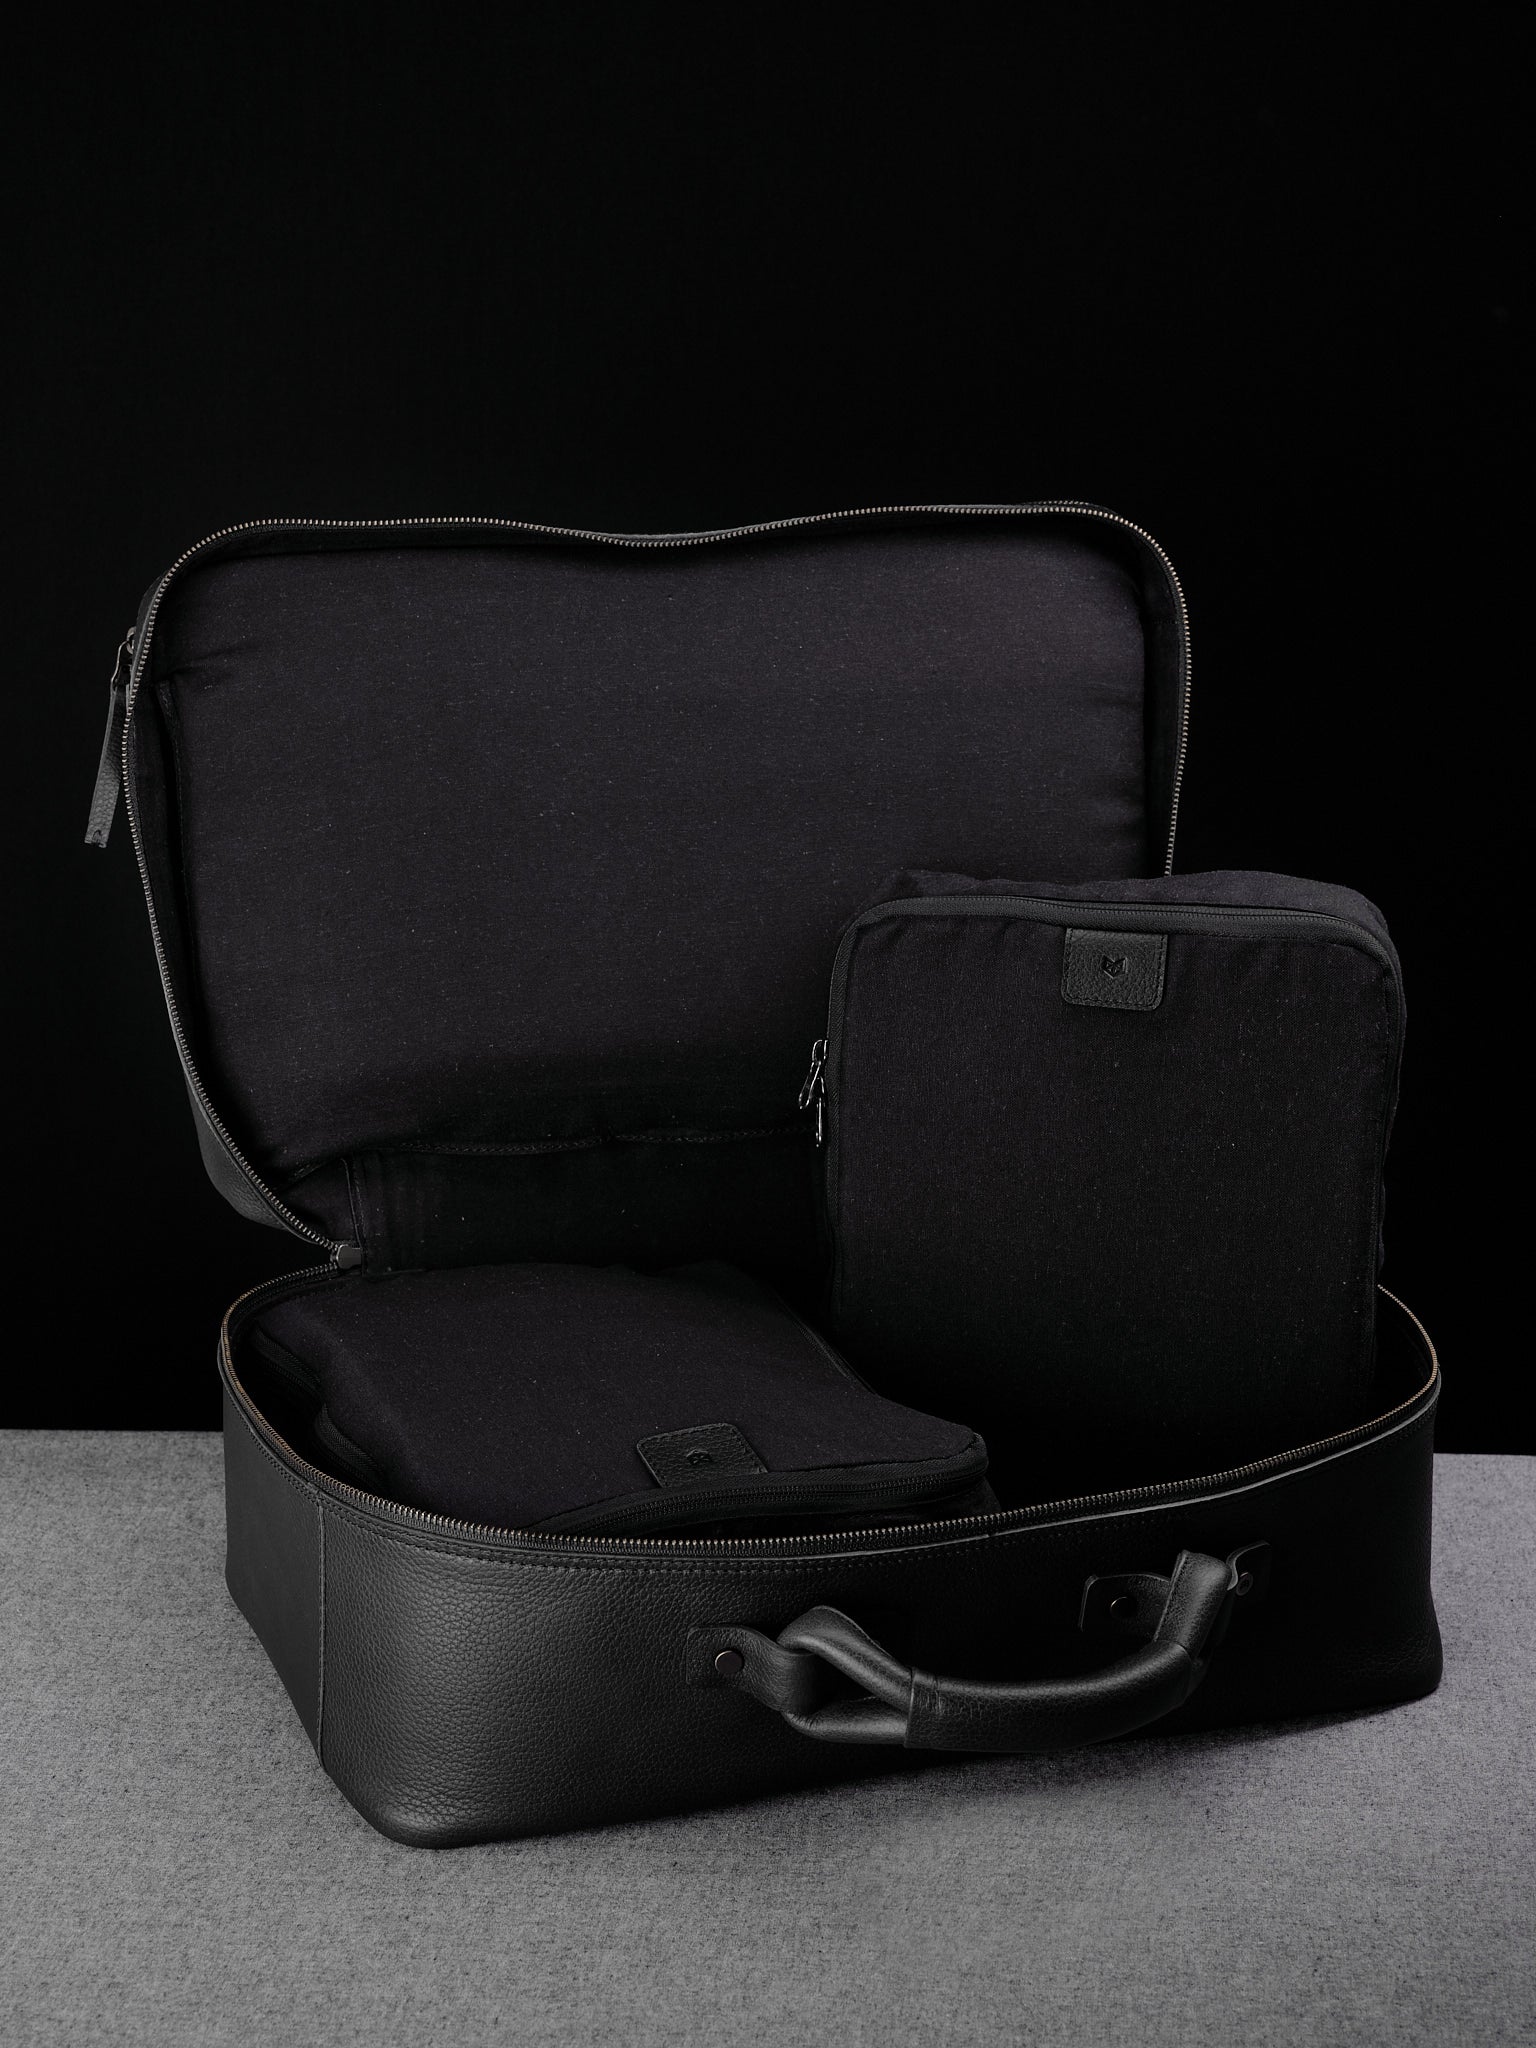 Linen Packign Cubes. Large Duffle Bag Black by Capra Leather